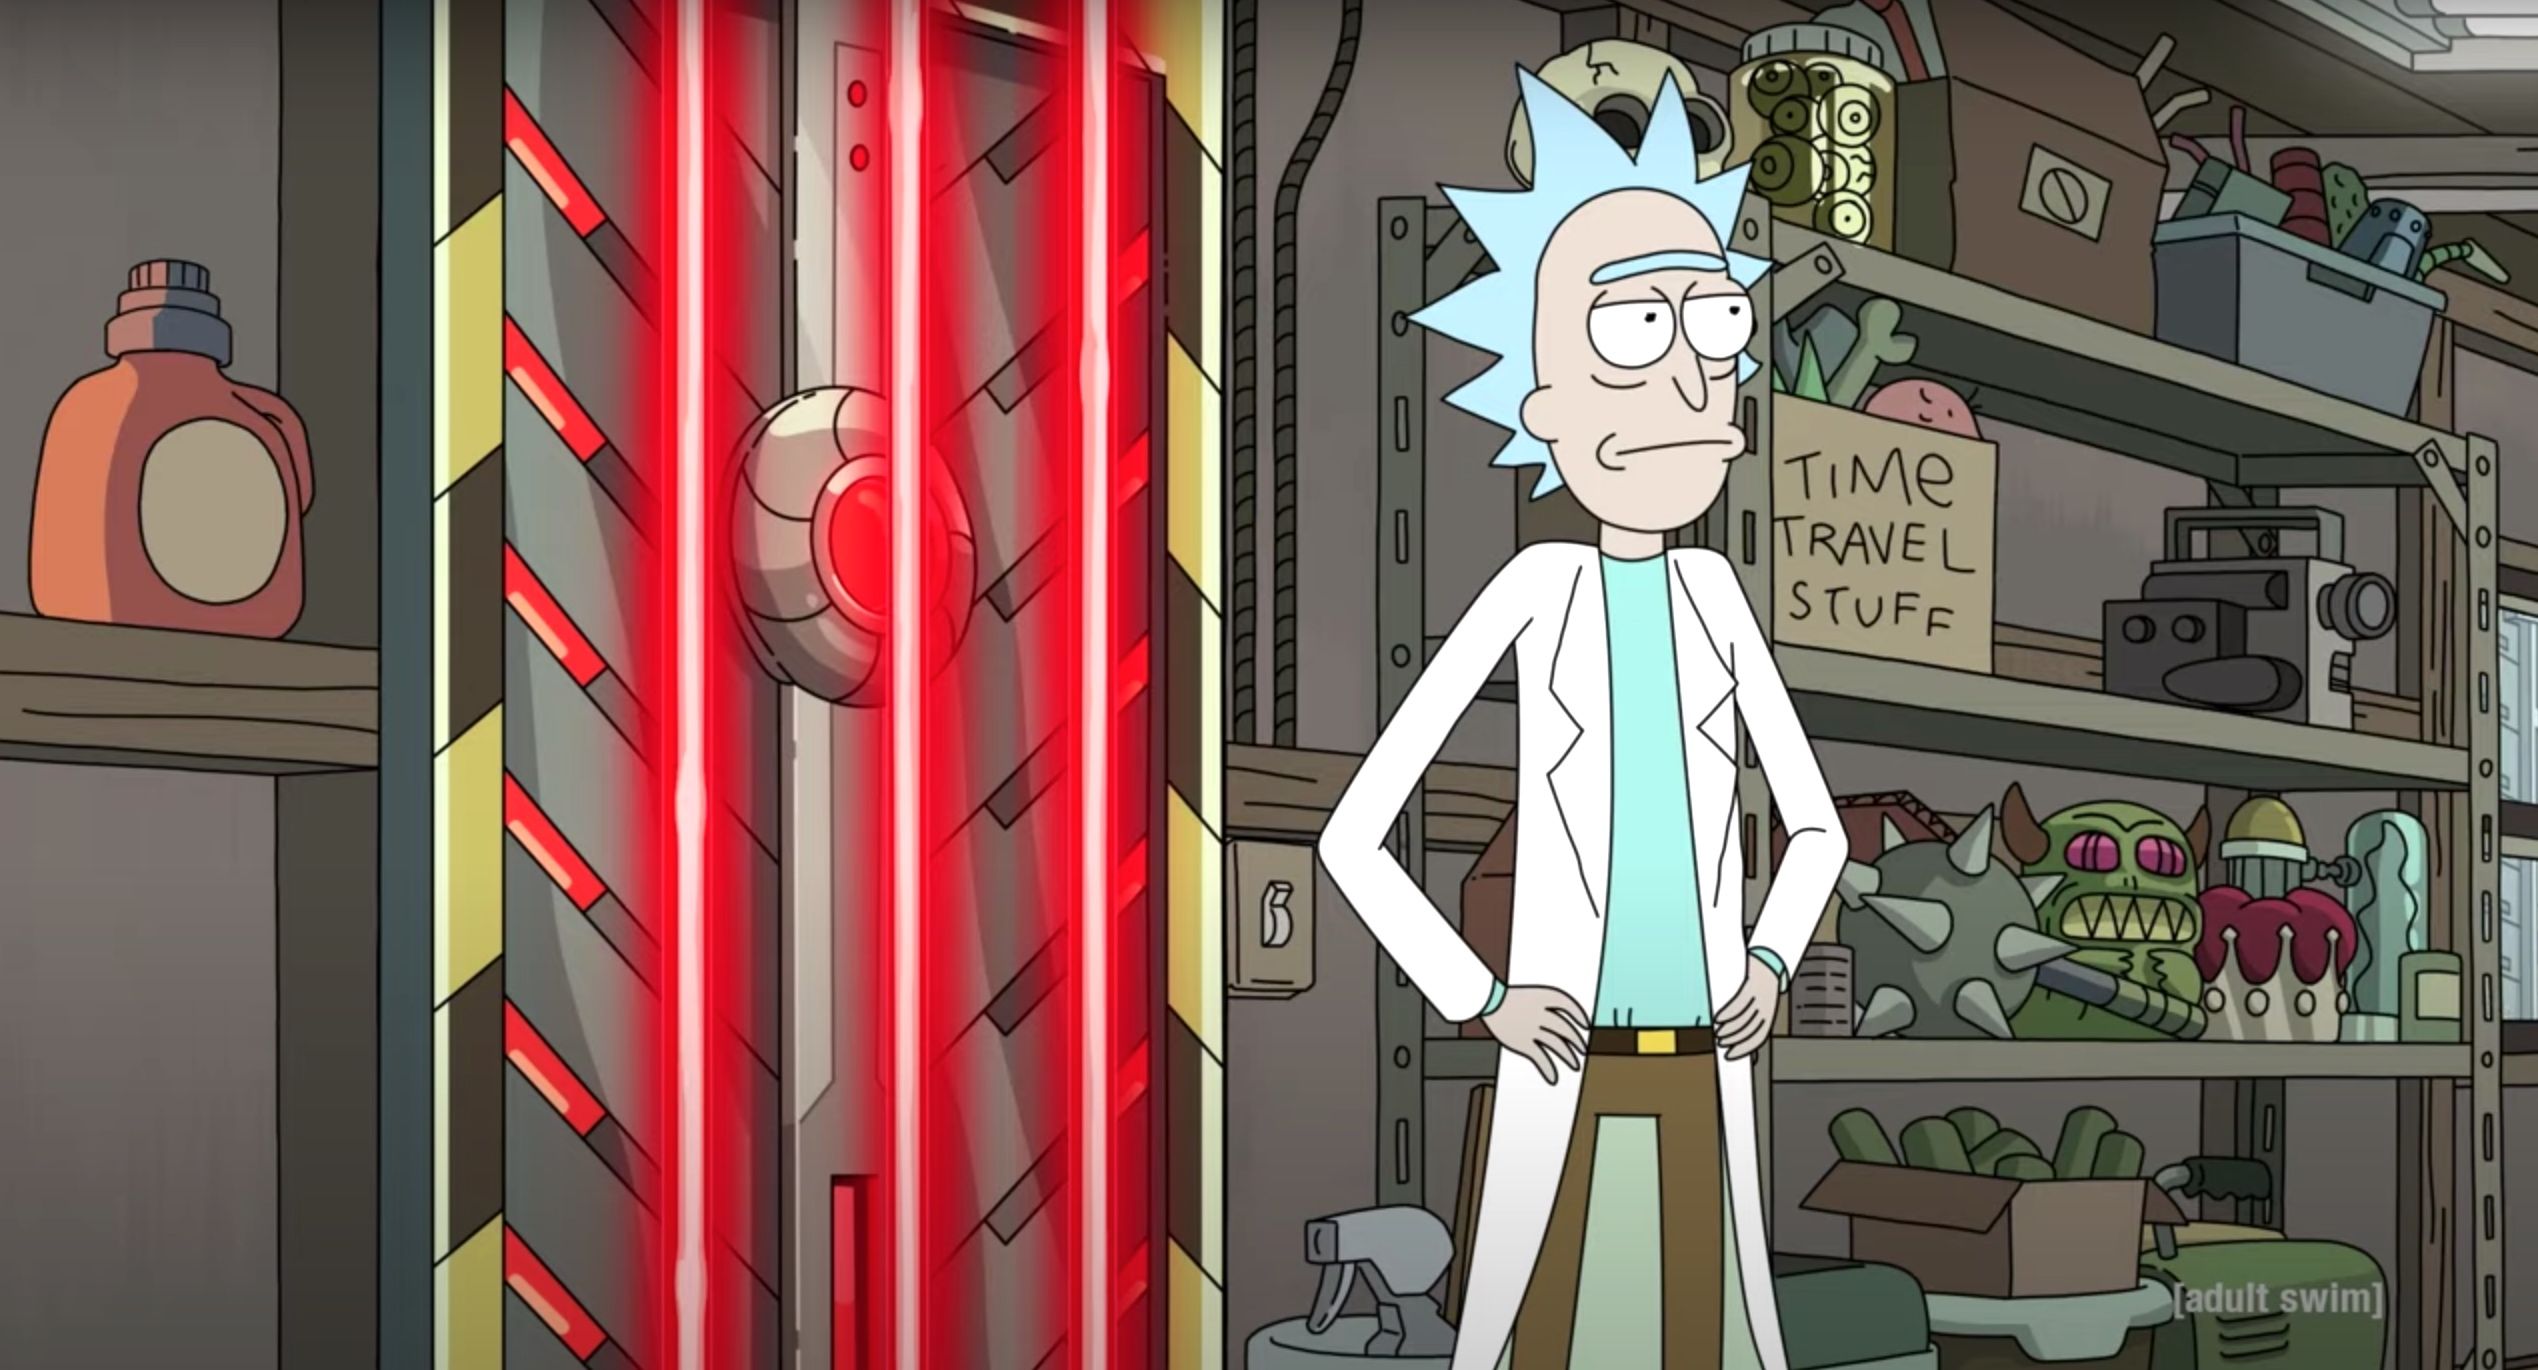 Adult Swim Cartoon Porn Captions - Rick and Morty announces spin-off based on recurring characters